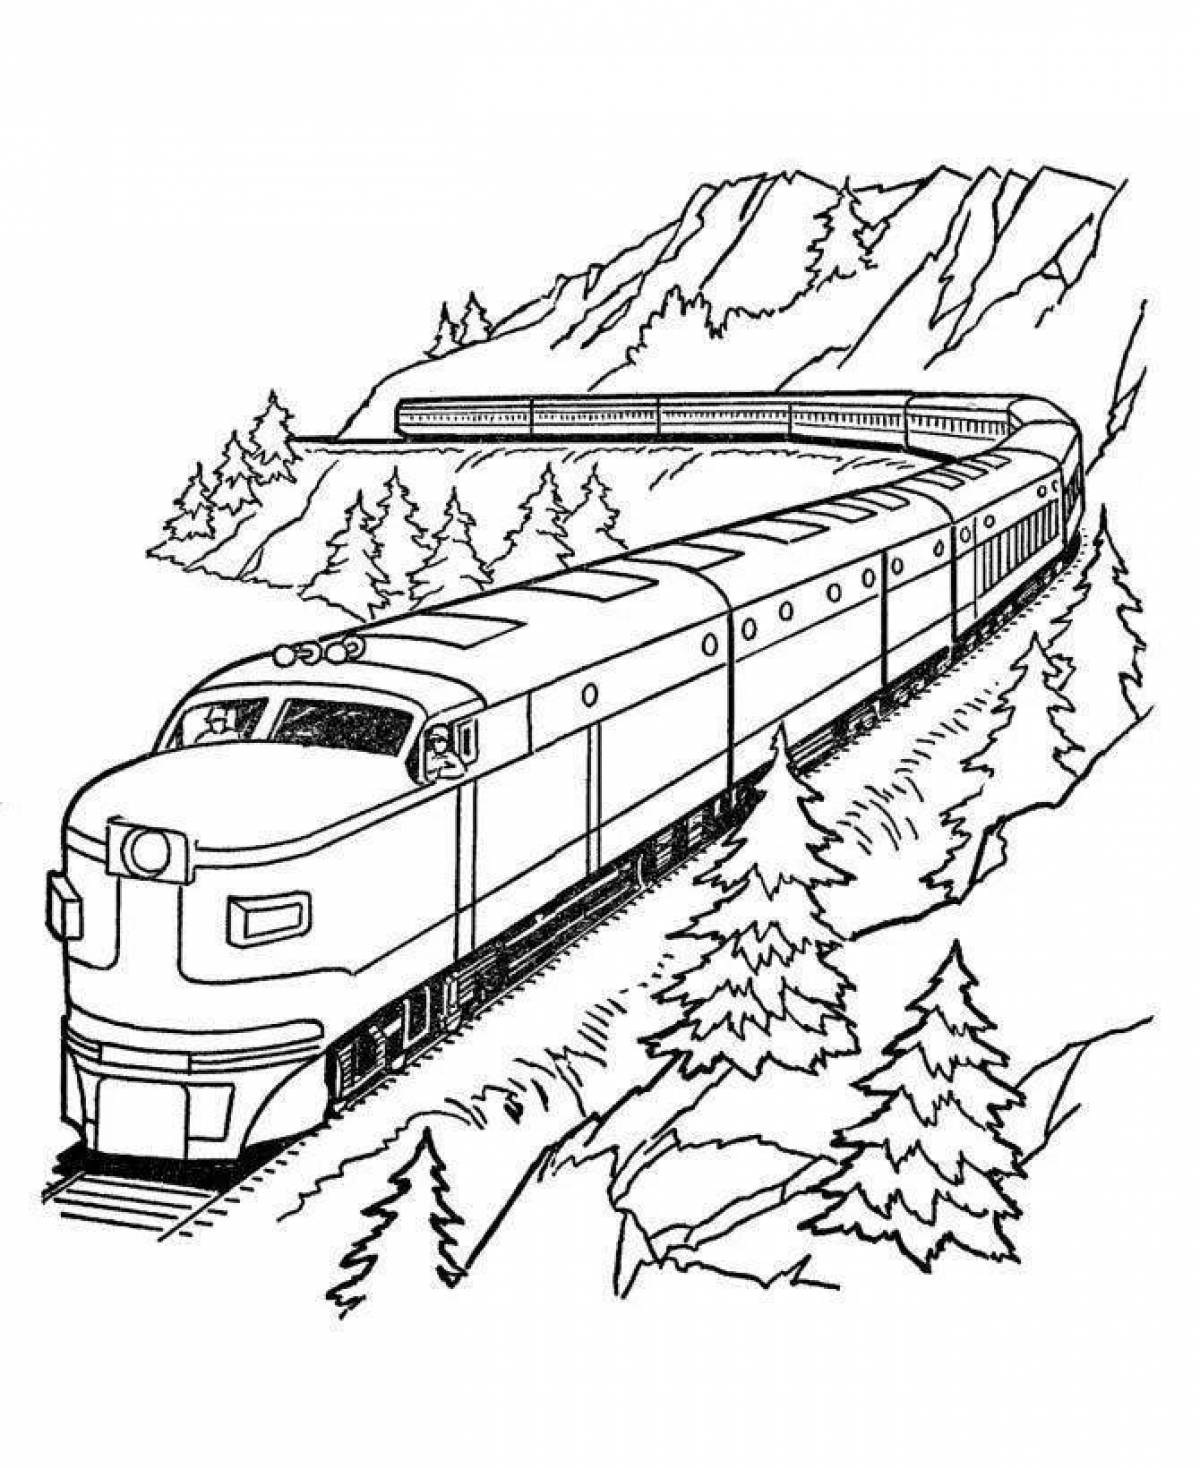 Freight train coloring page with color eyes